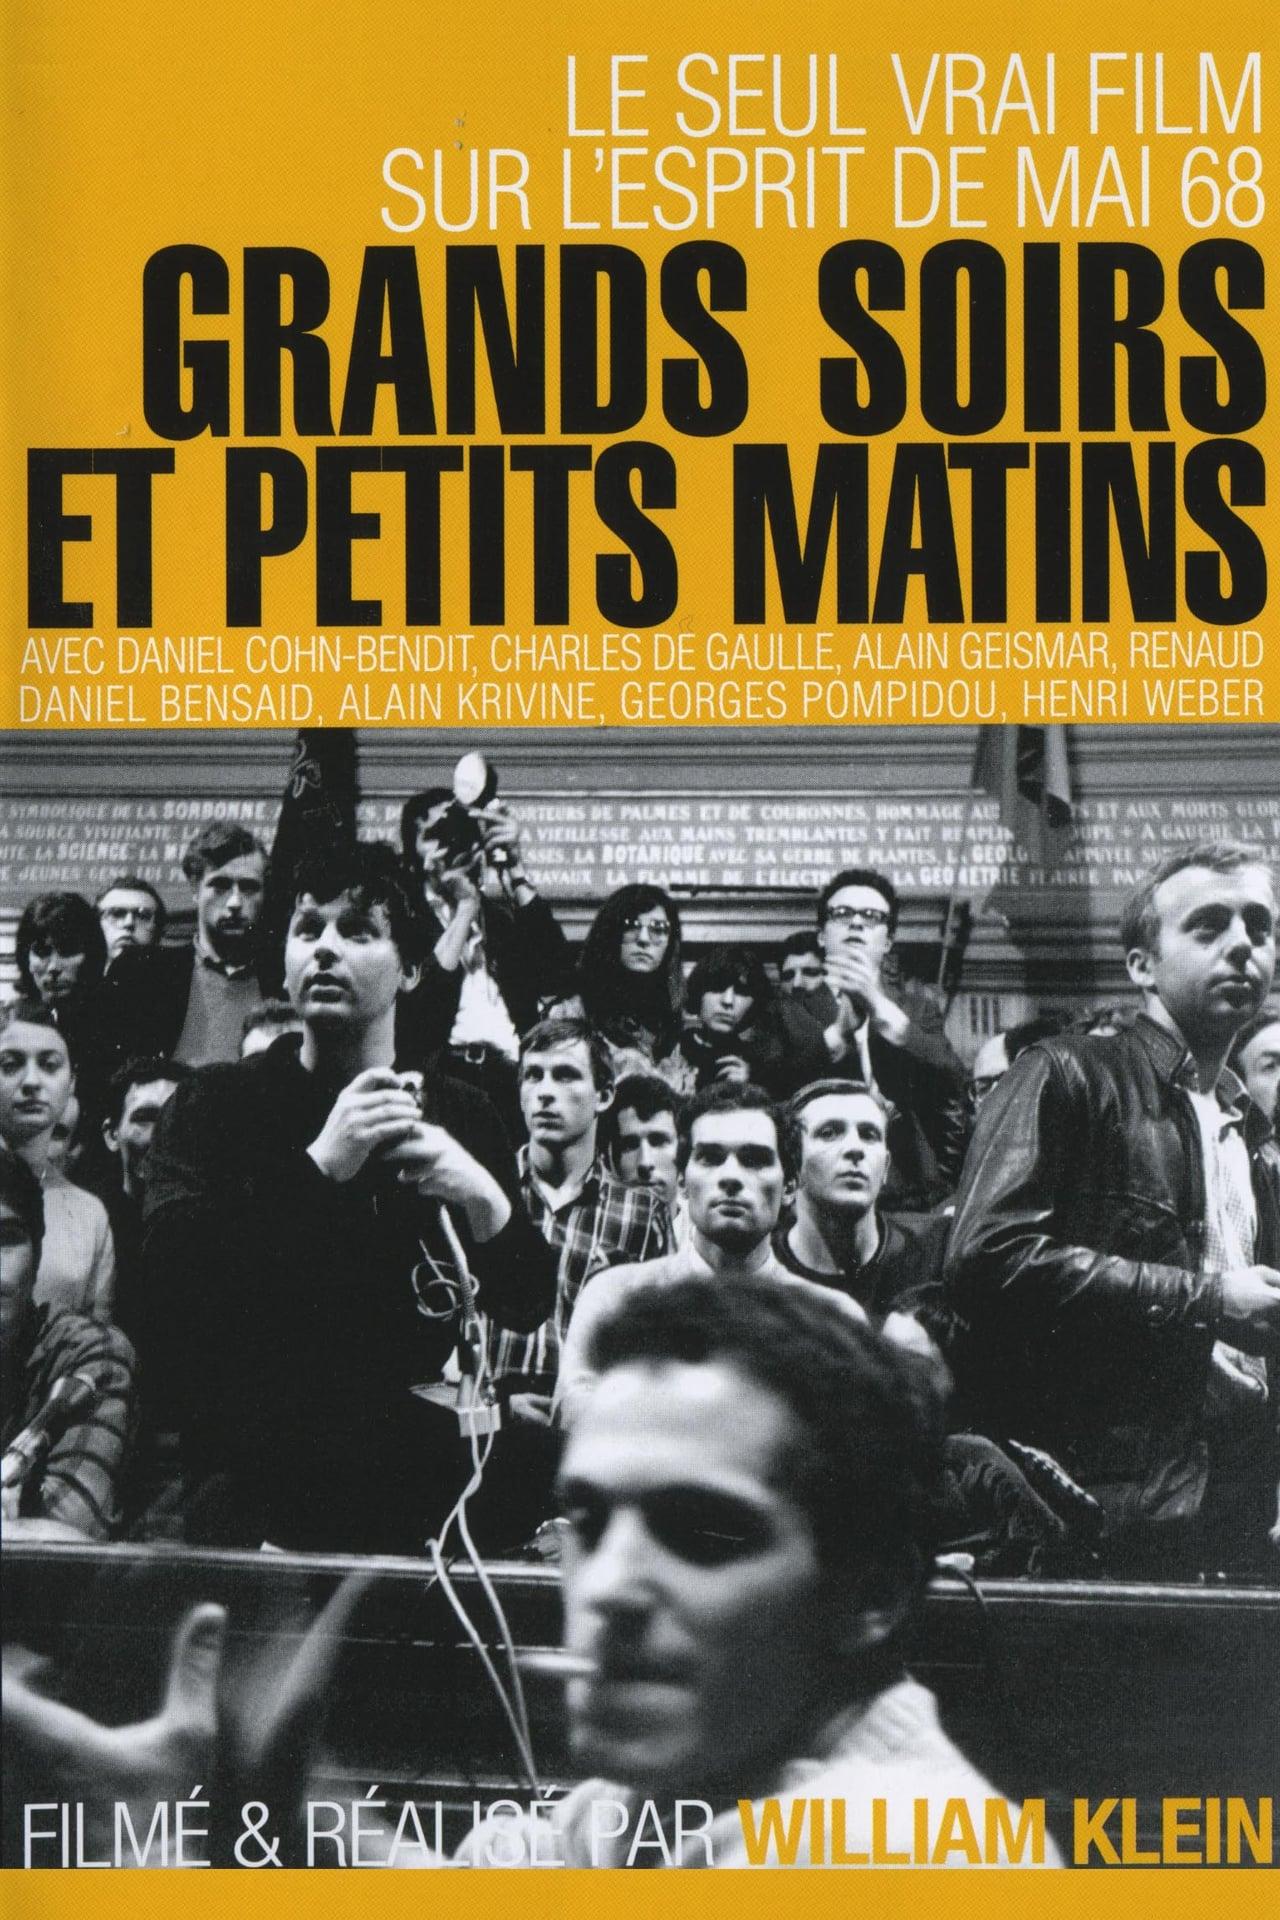 Grands soirs et petits matins poster